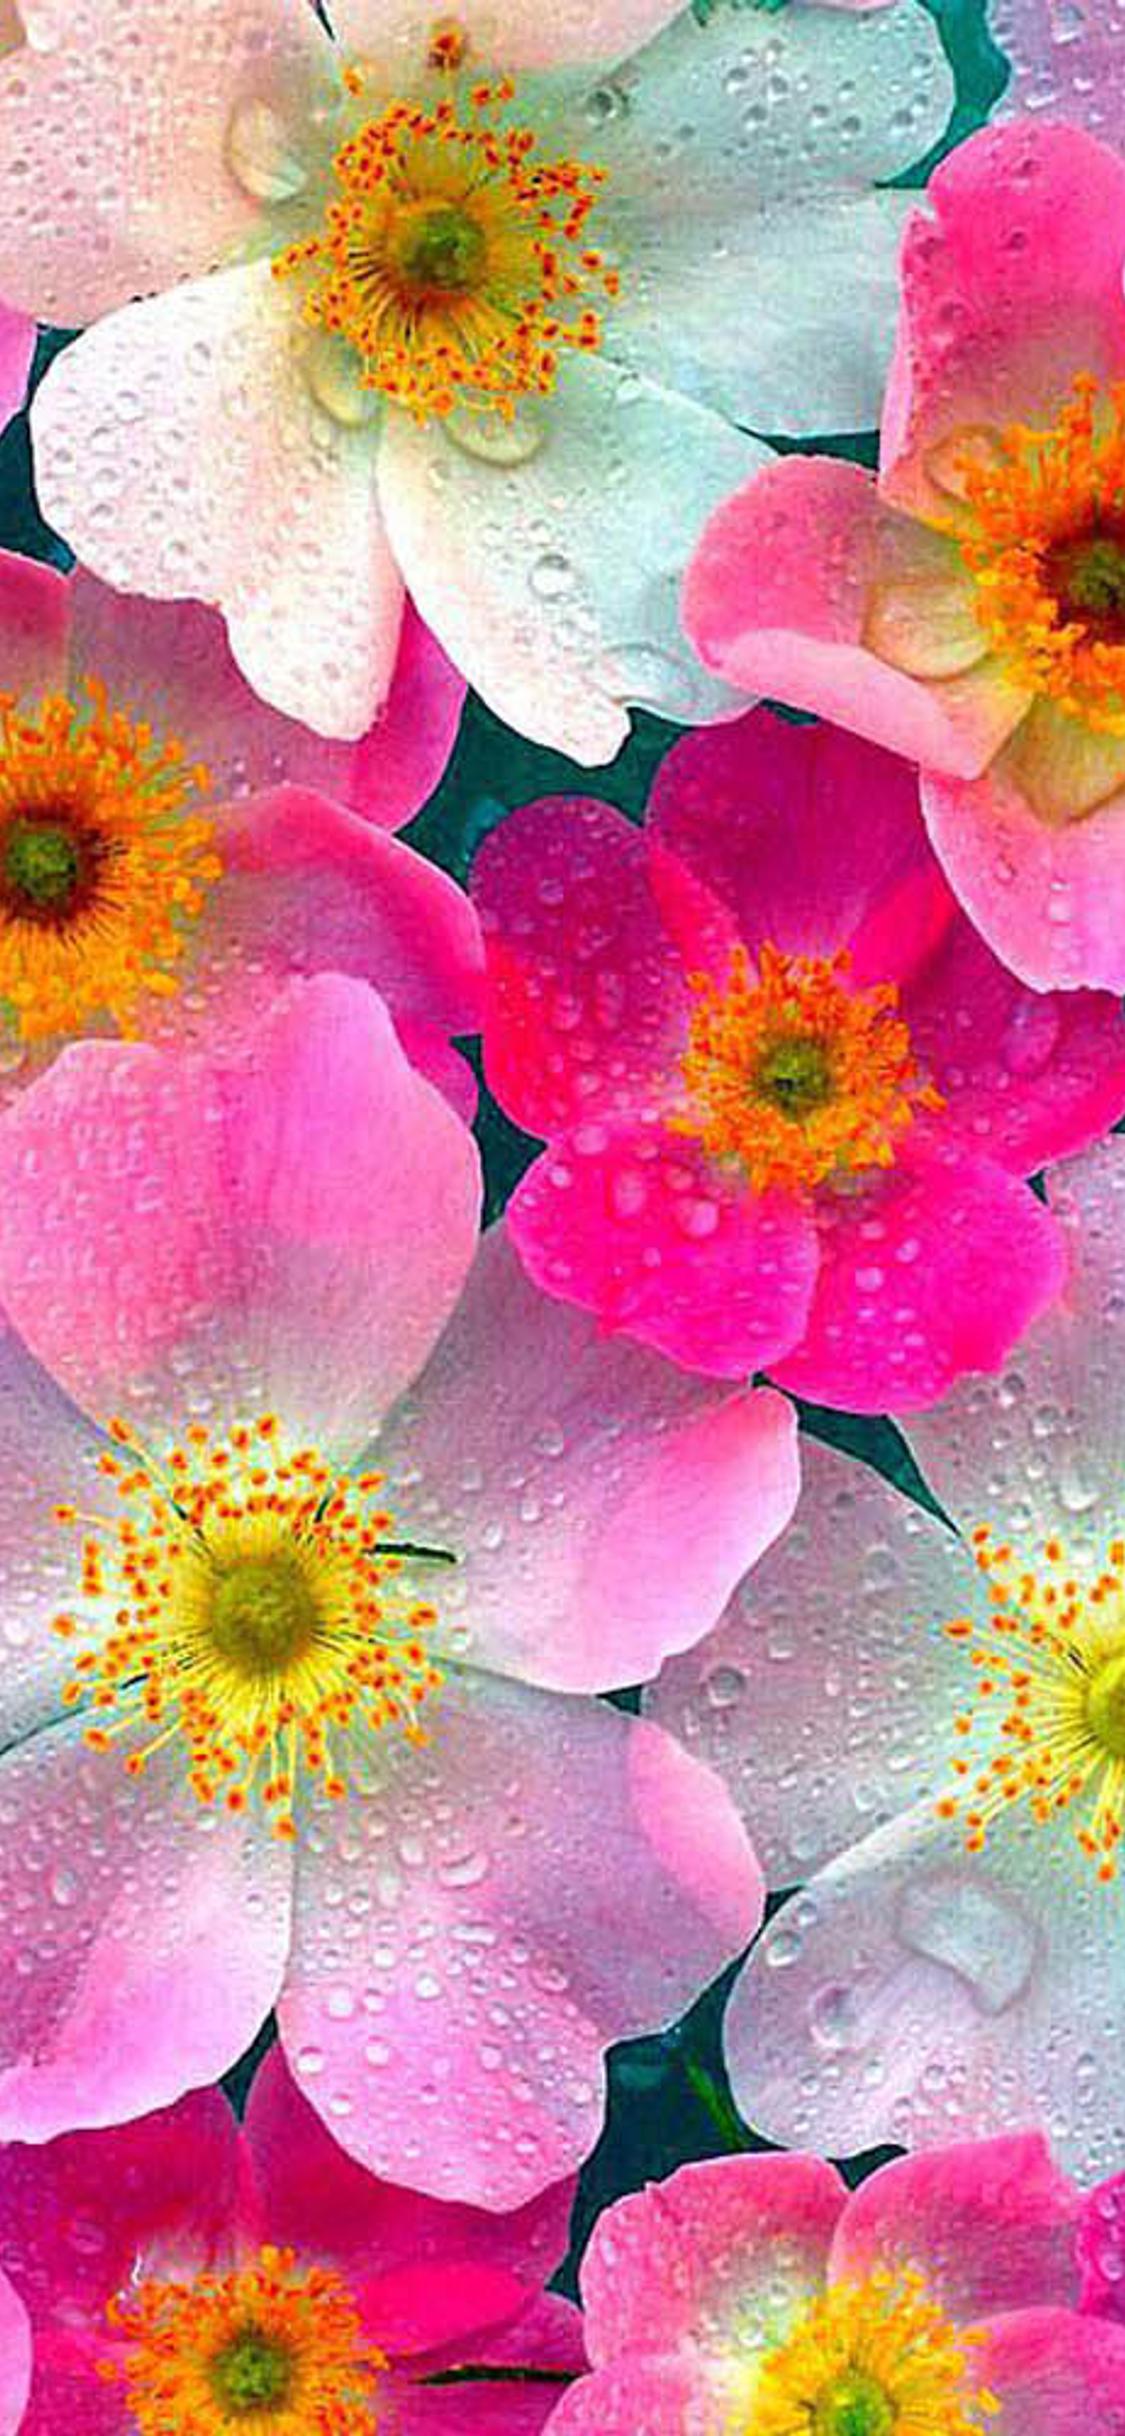 White and pink flowers with water drops